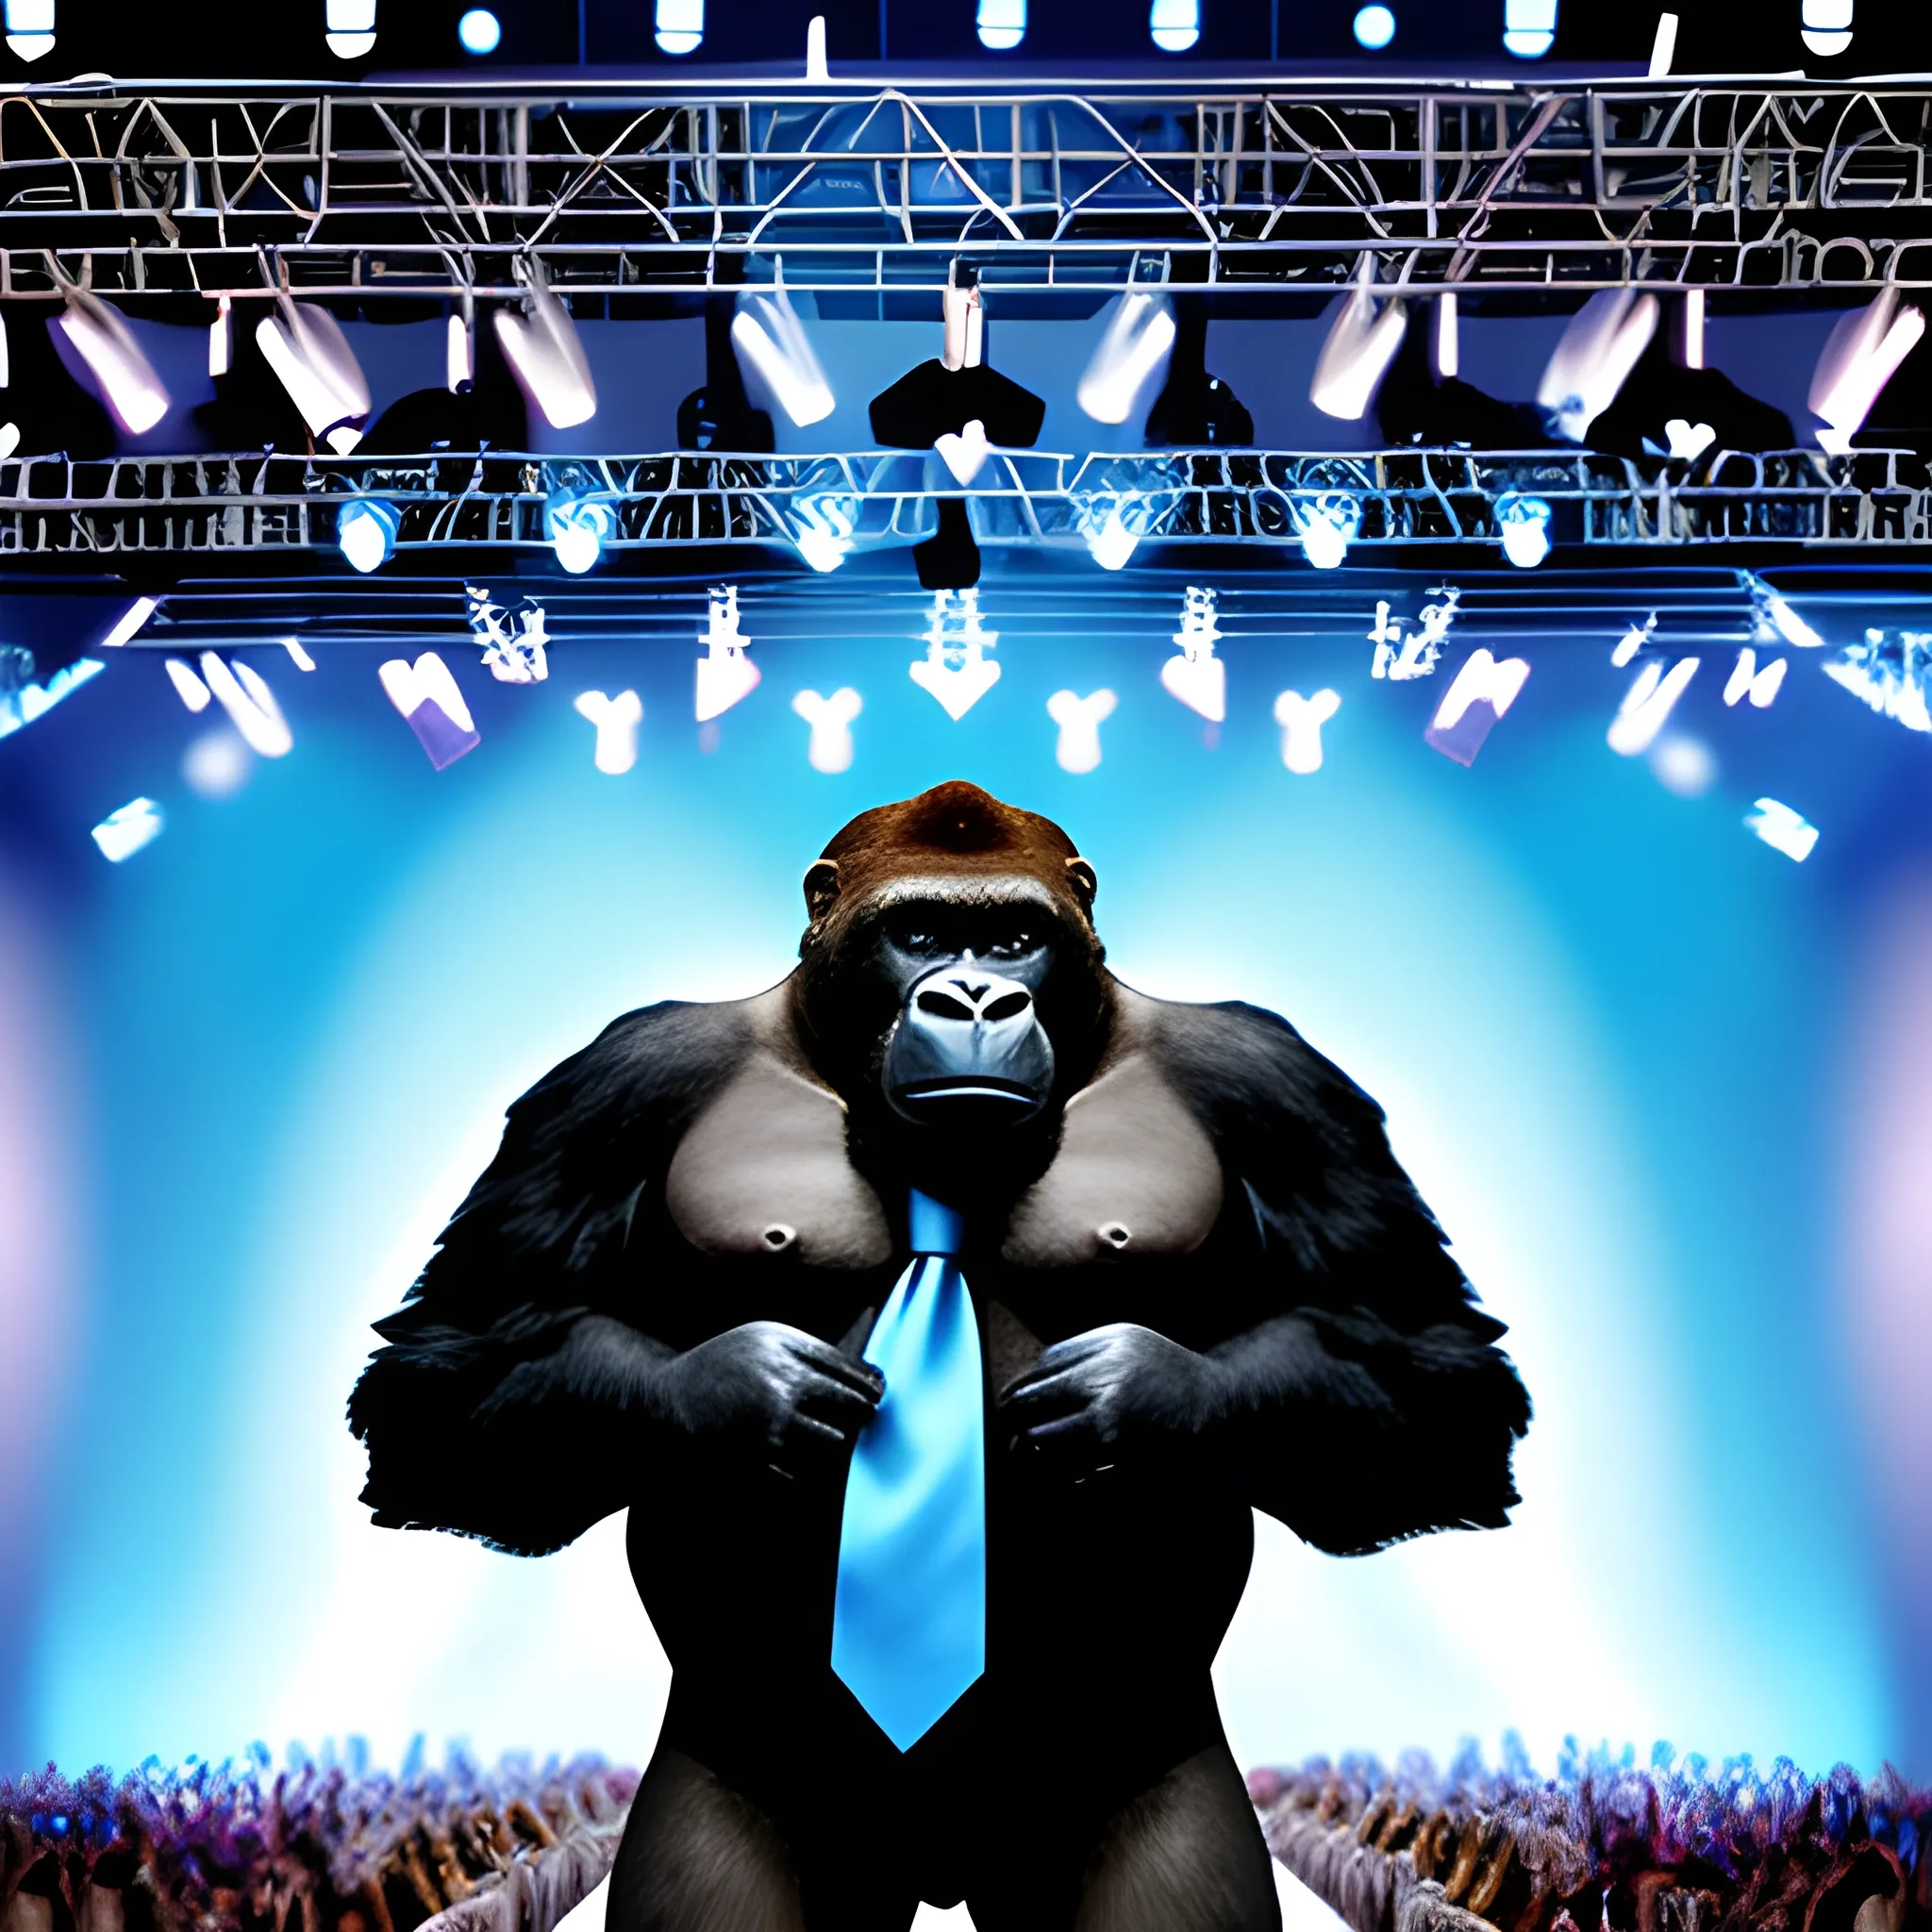 gorilla with tie, a packed show, runway full of people, set of speakers playing, blue lights, Cartoon, Brazilian Party